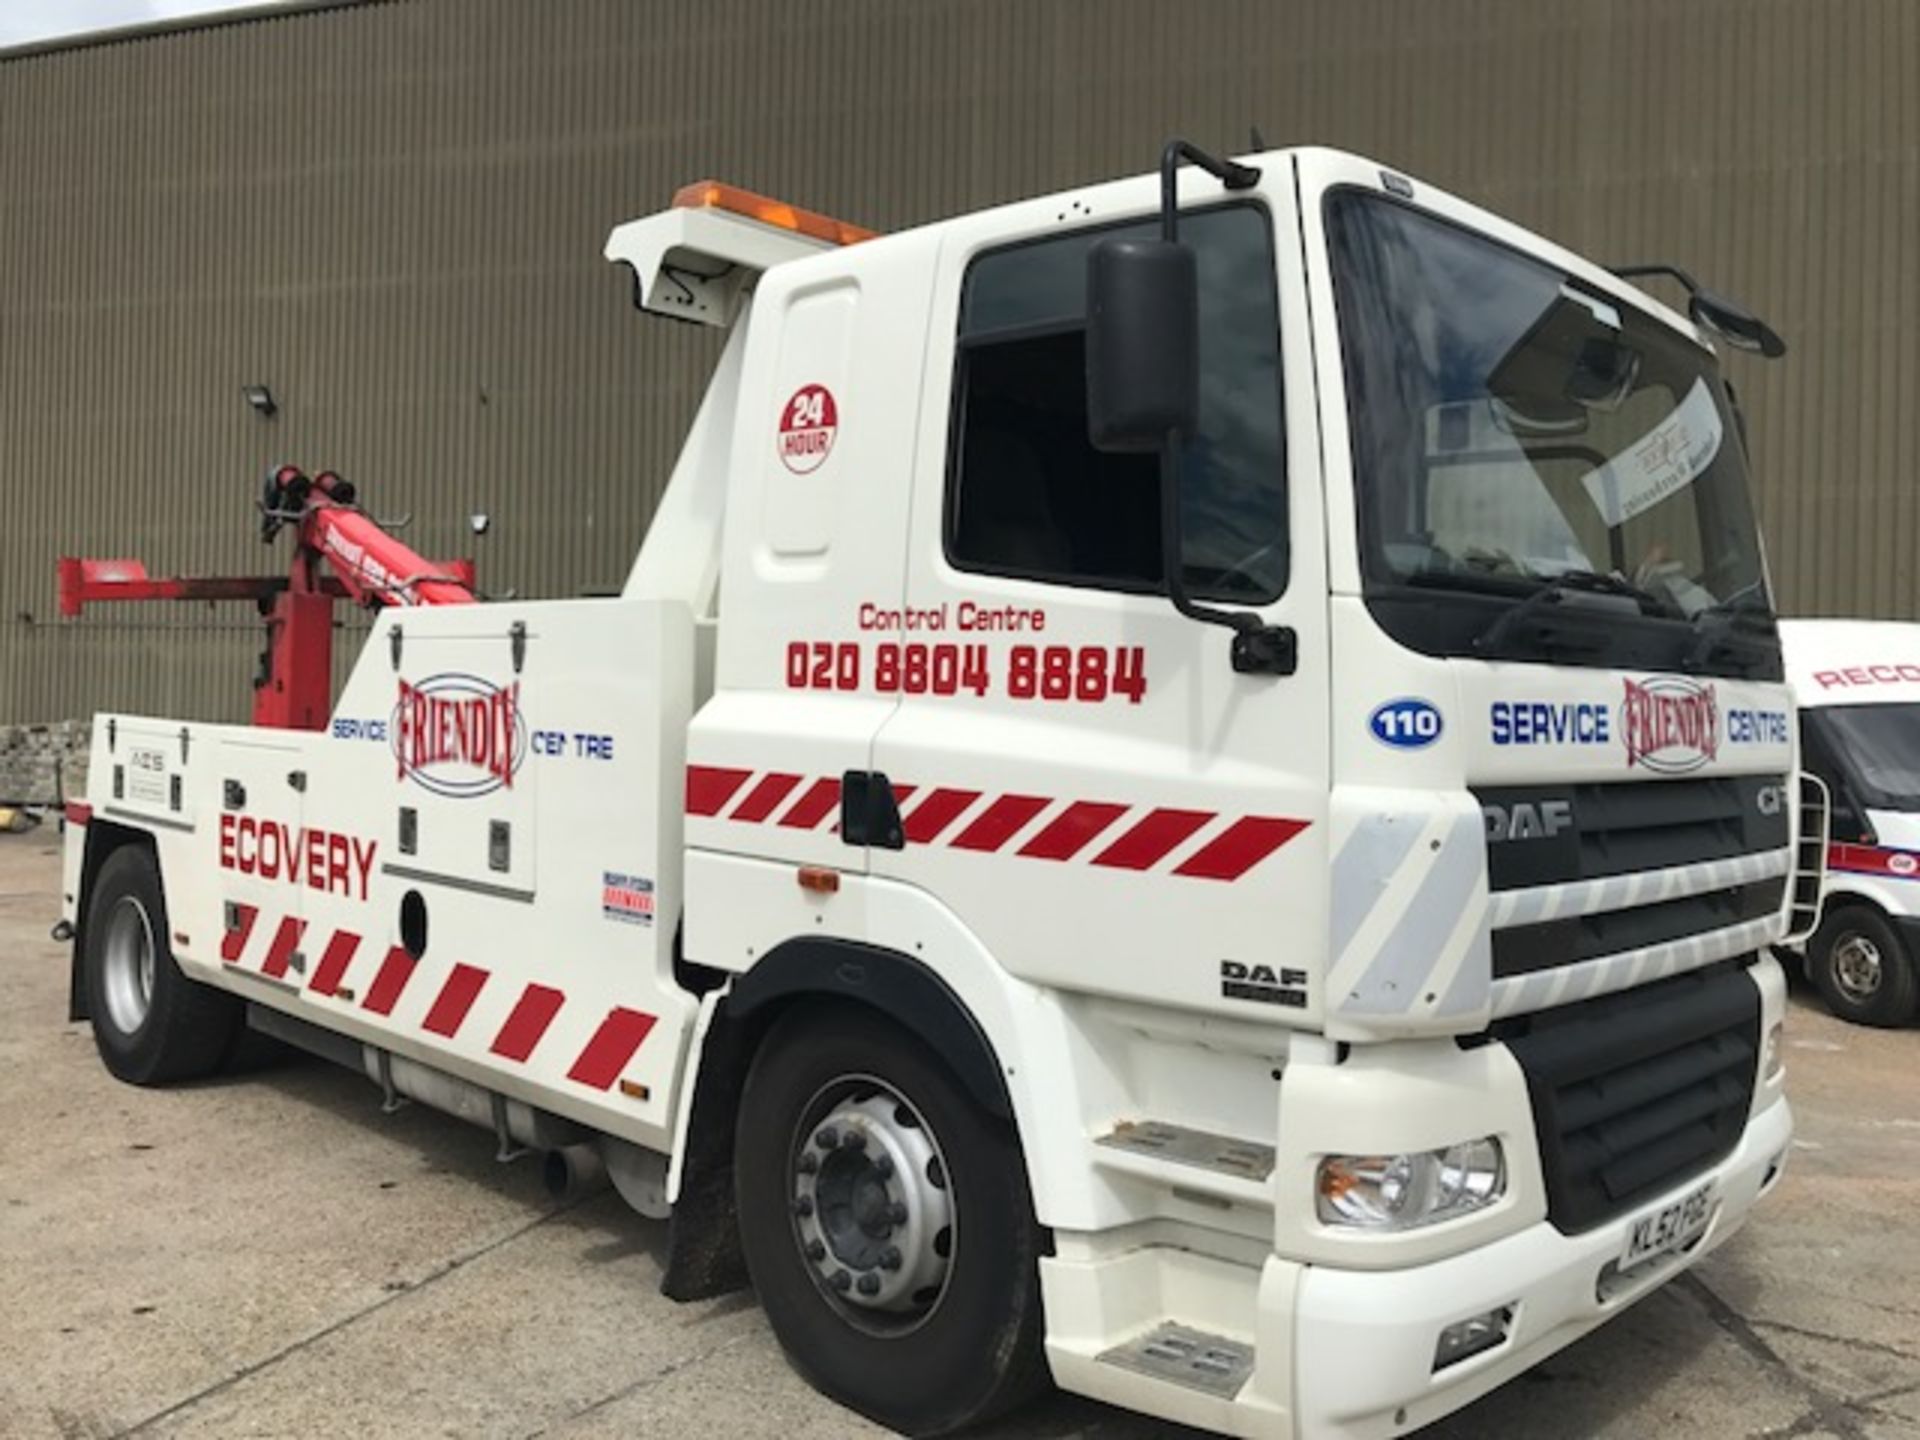 2003 DAF CF85 34018T sleeper cab breakdown recovery vehicle complete with Roger Dyson Group body and - Image 4 of 27